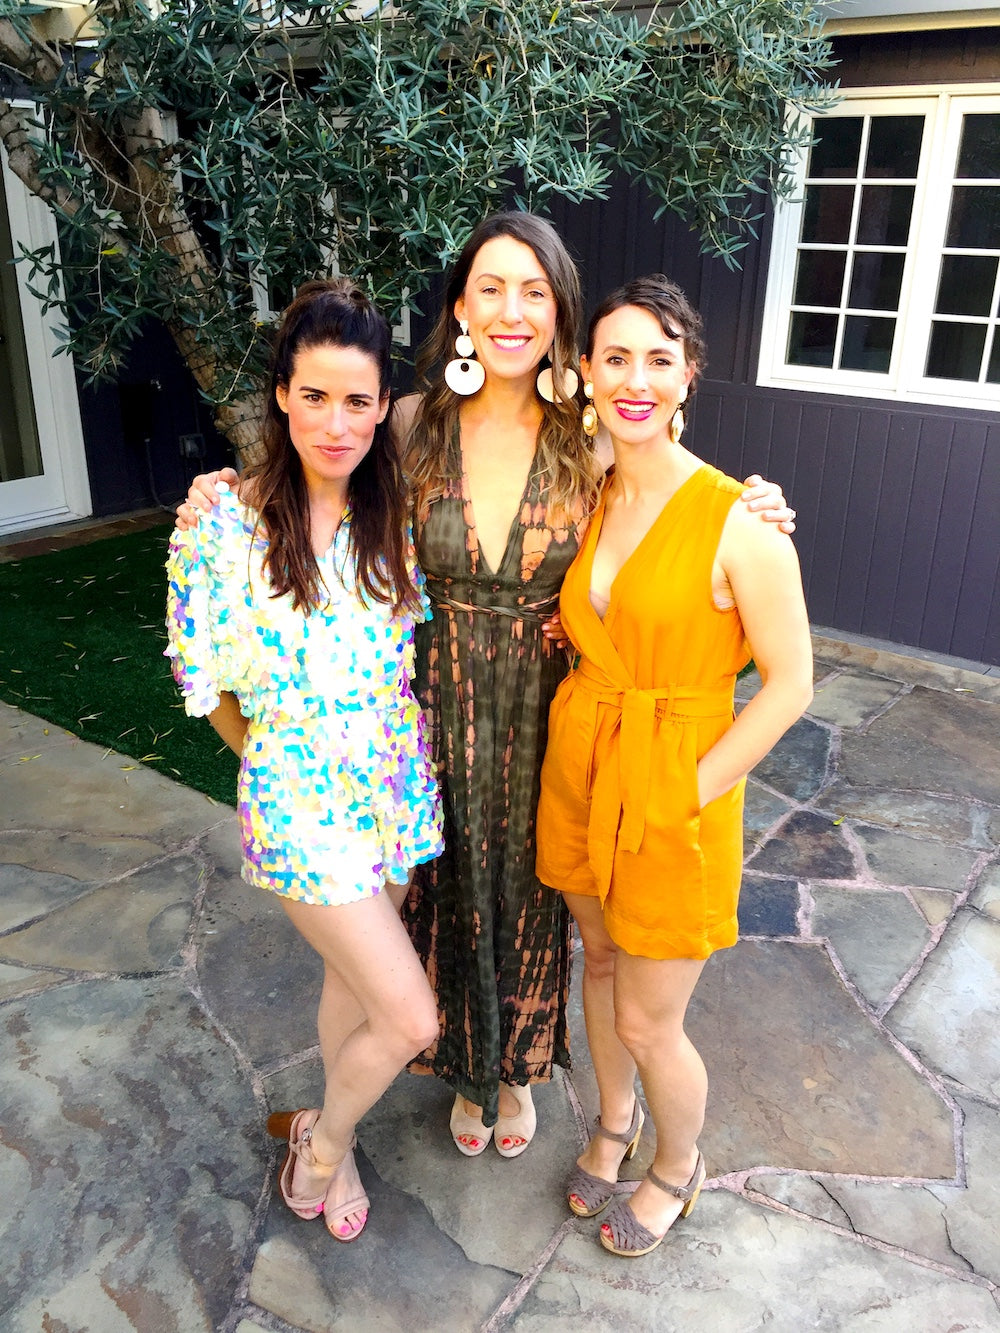 Woman in sequin playsuit poses with friends